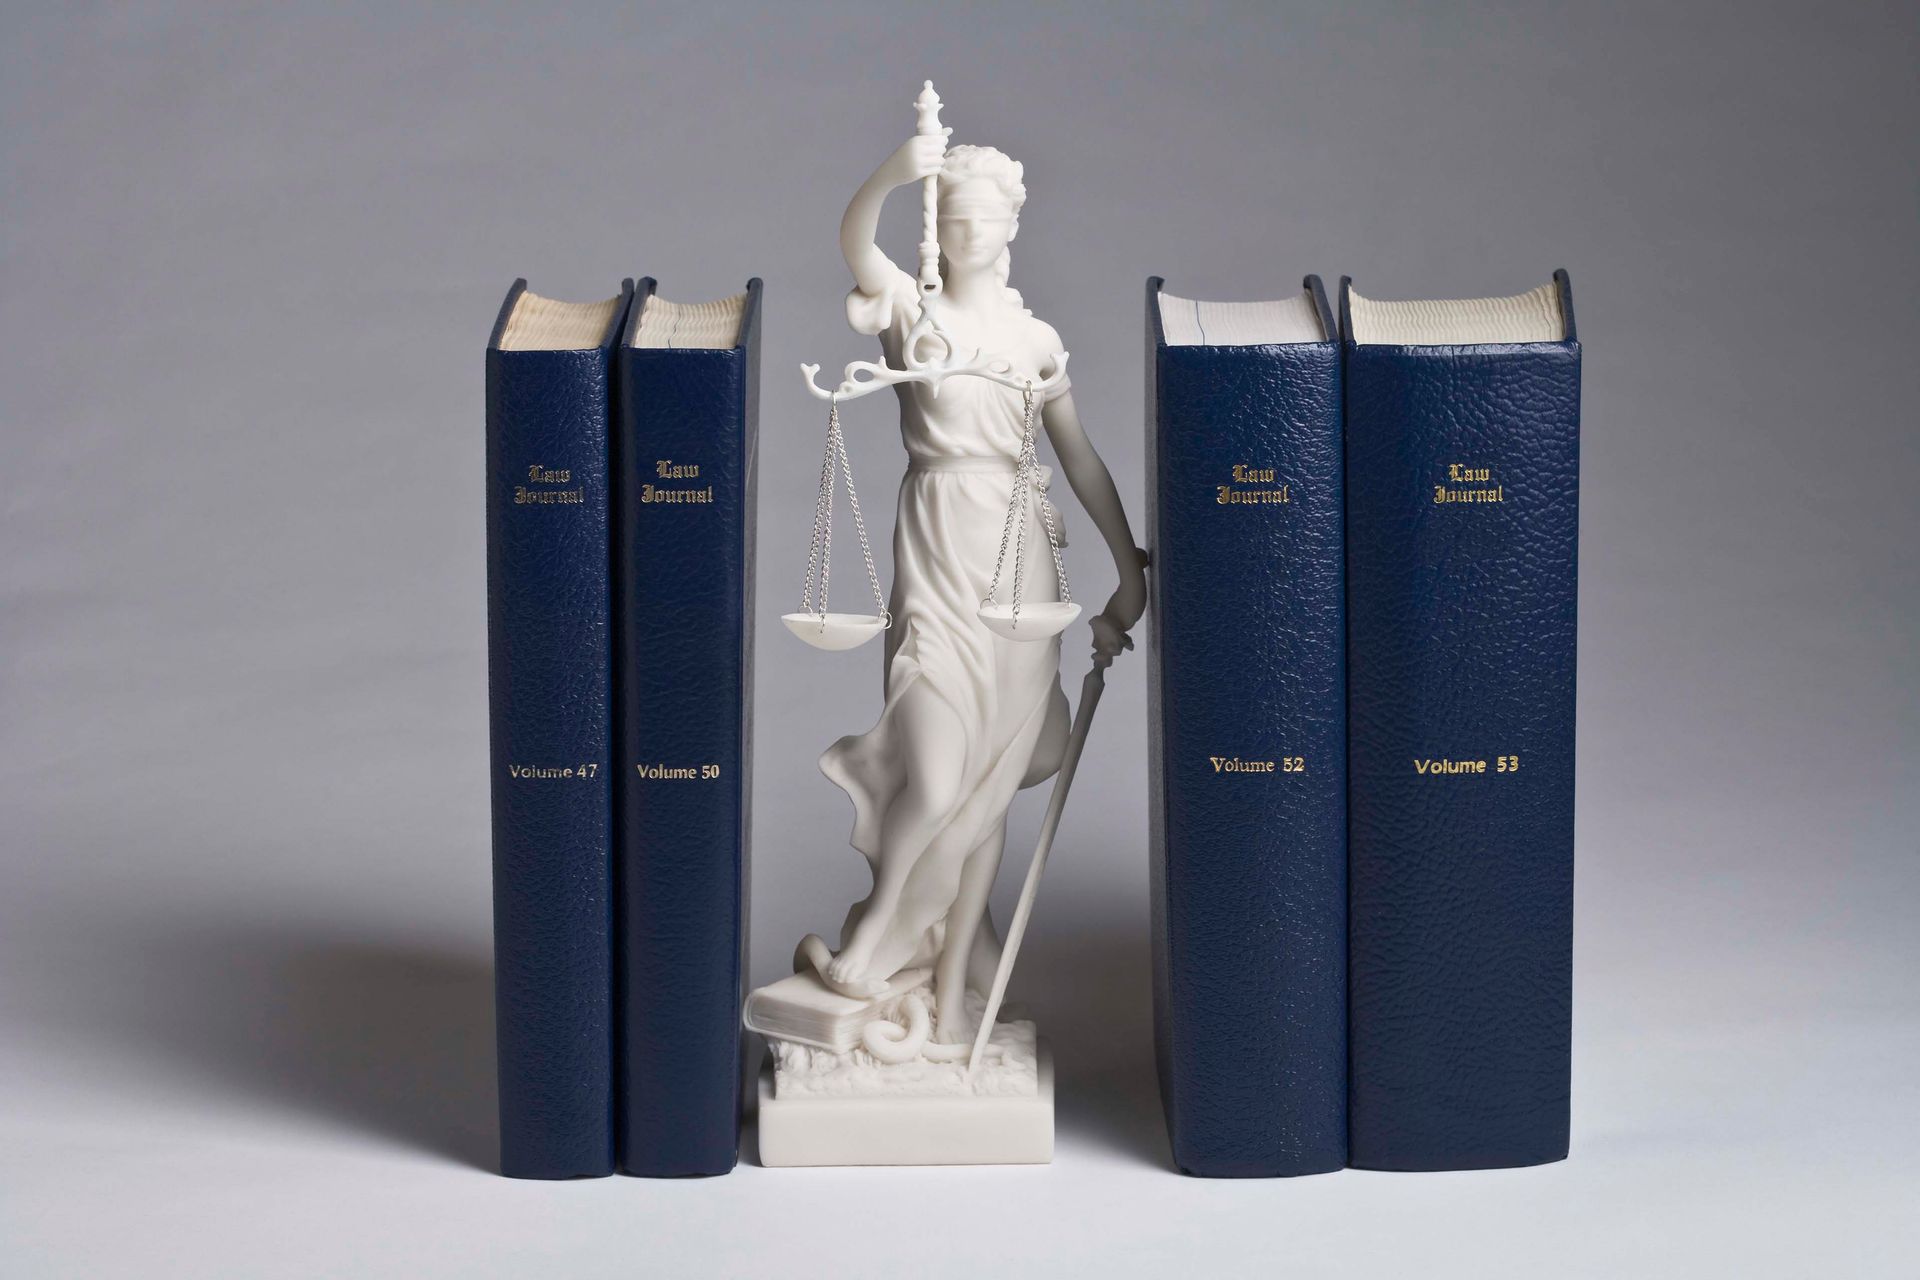 A statue of lady justice standing next to three books